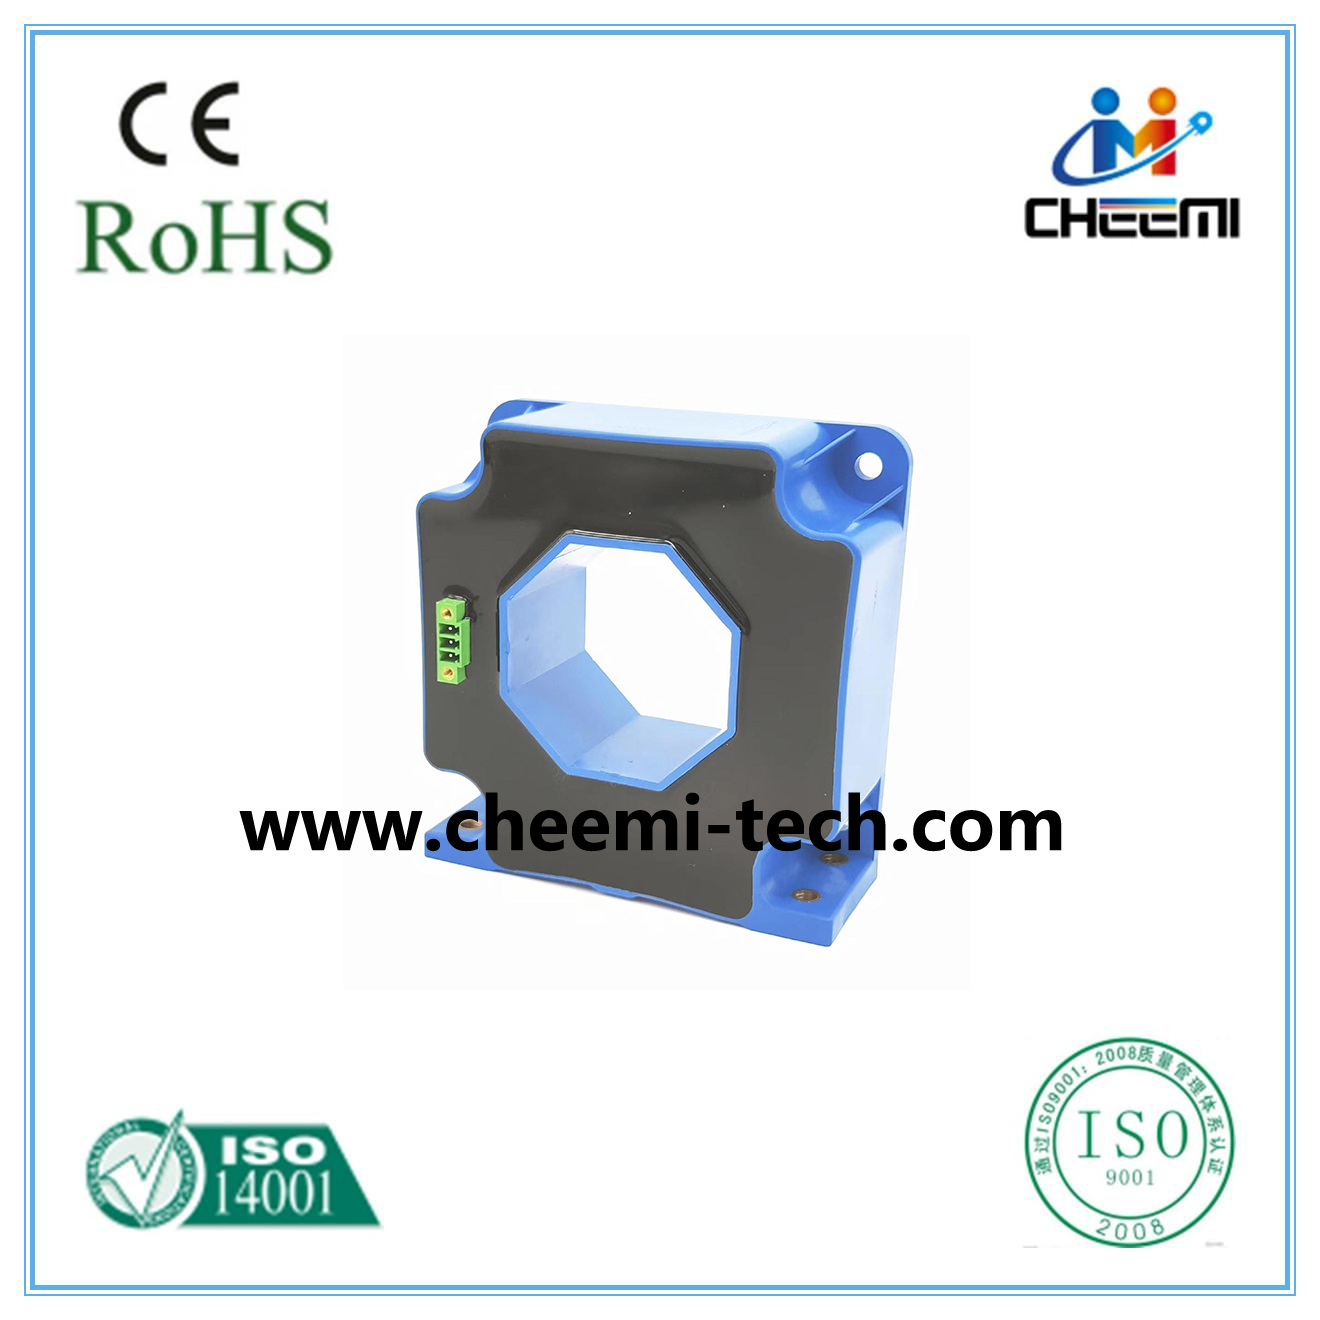 High-Accuracy-Current-Sensors-CHB-LF15D200-400T-Applied-In-railway